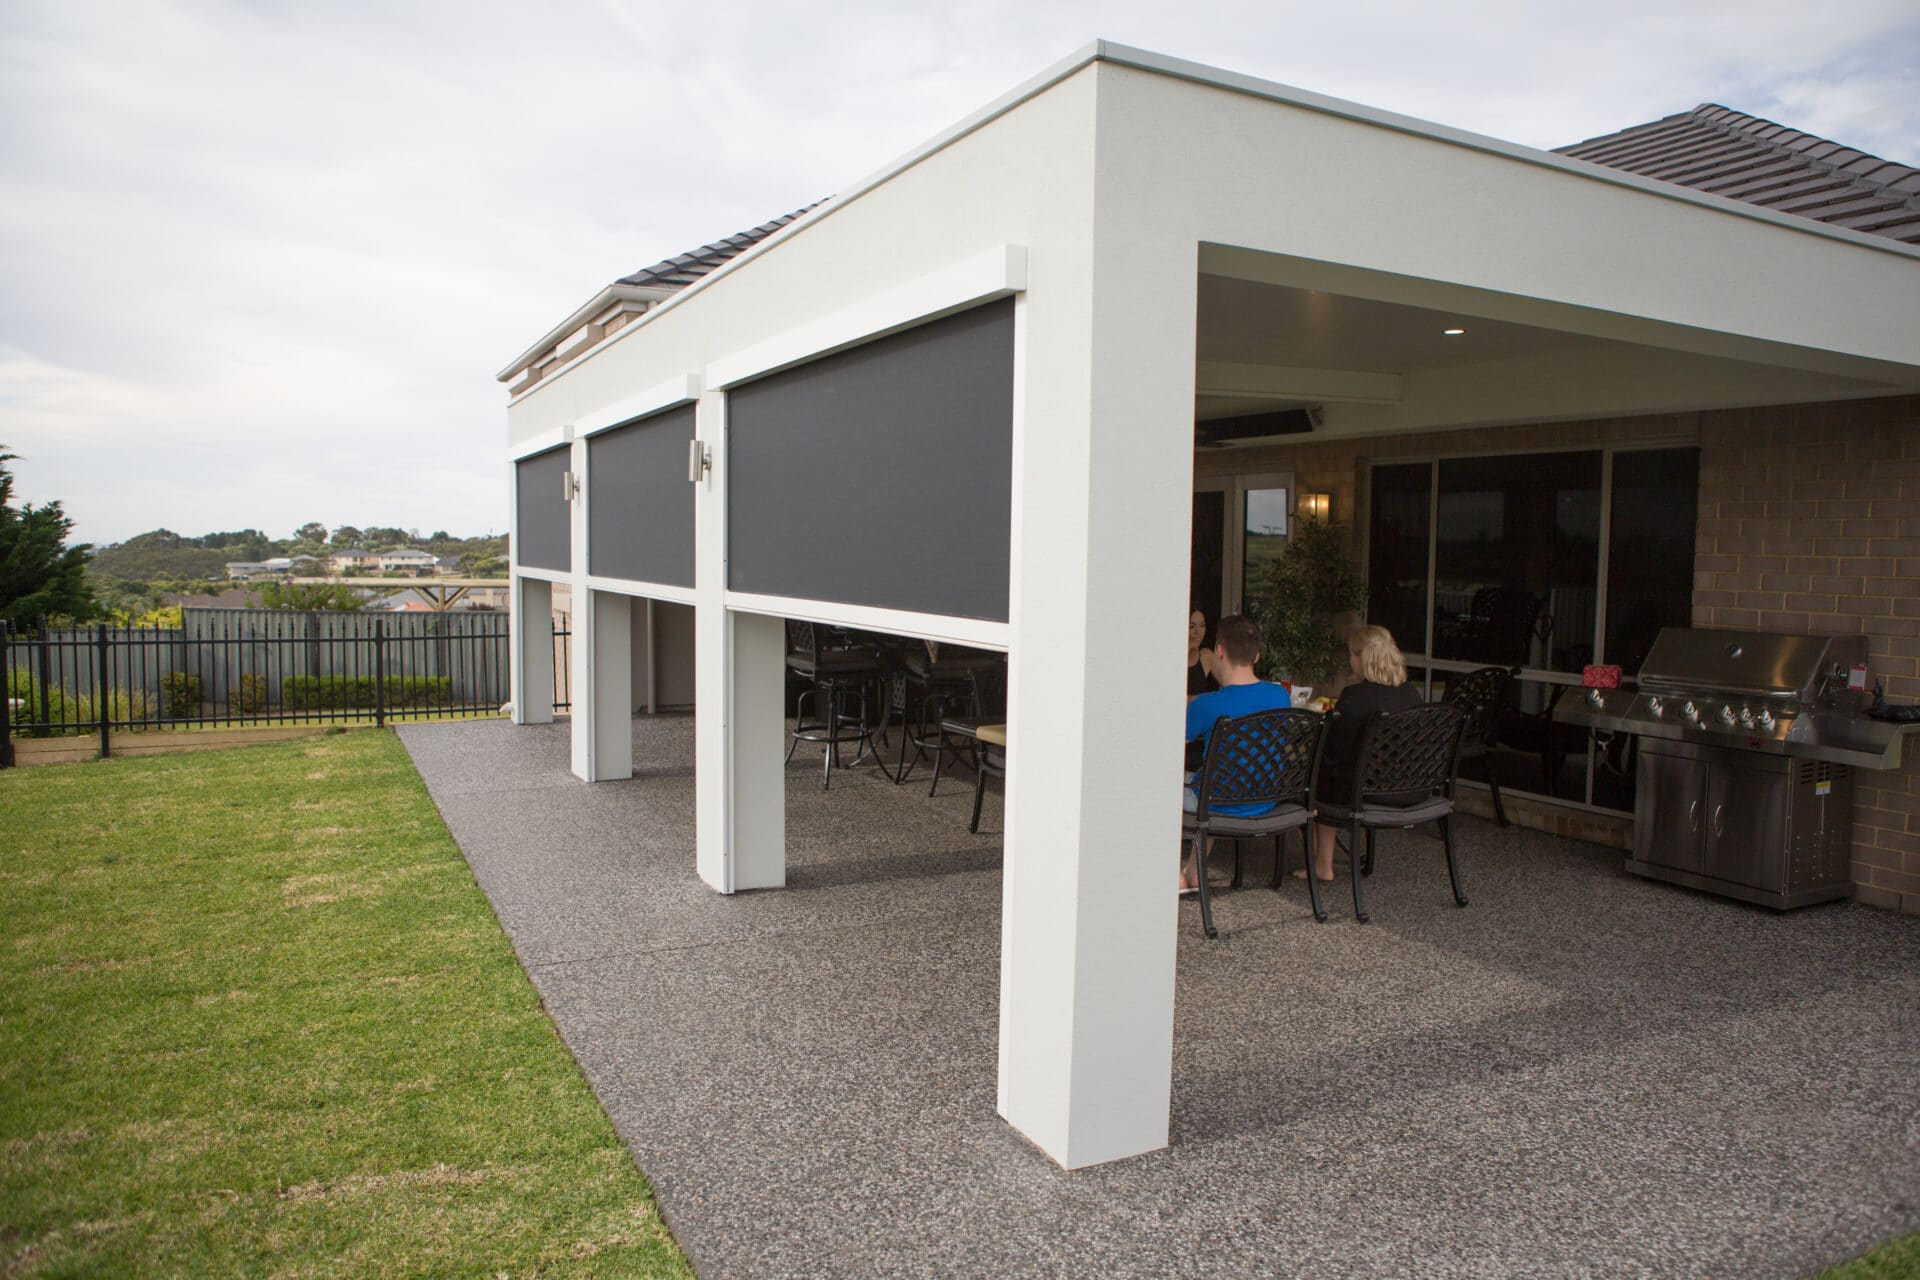 pergolas add protection from the weather elements